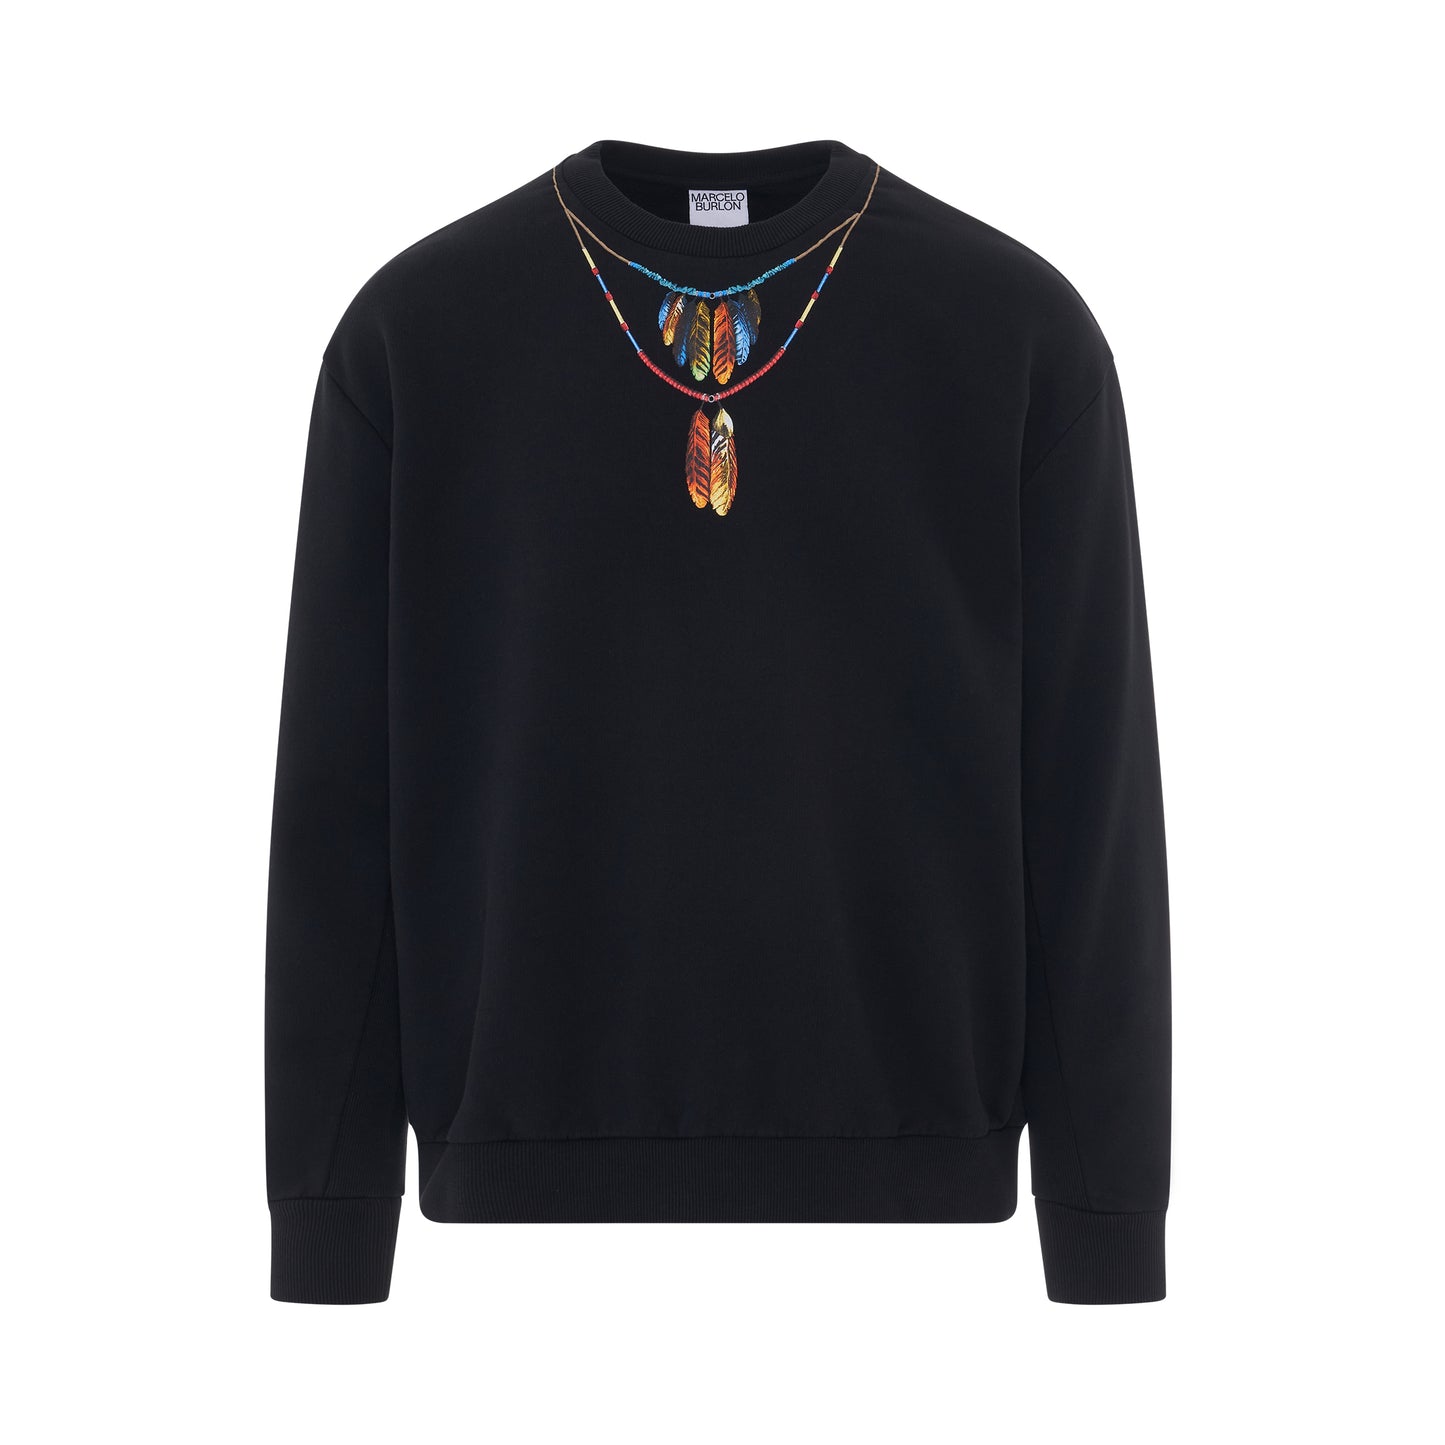 Feathers Necklace Oversized Crewneck in Black